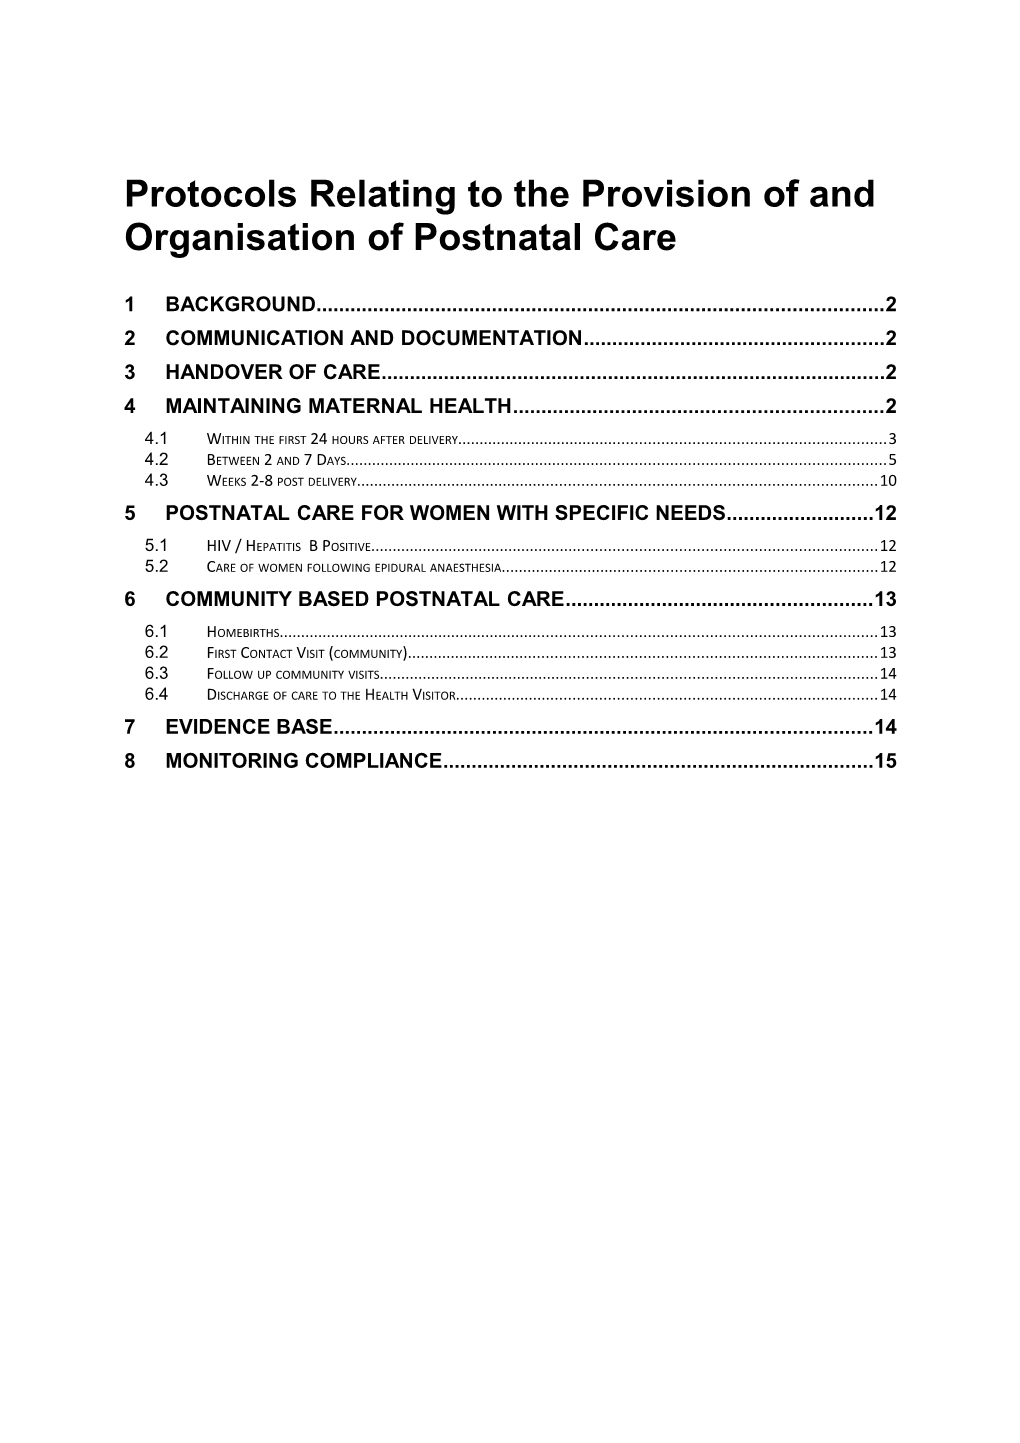 Protocols Relating the Provision of and Organisation of Postnatal Care to Promote Maternal